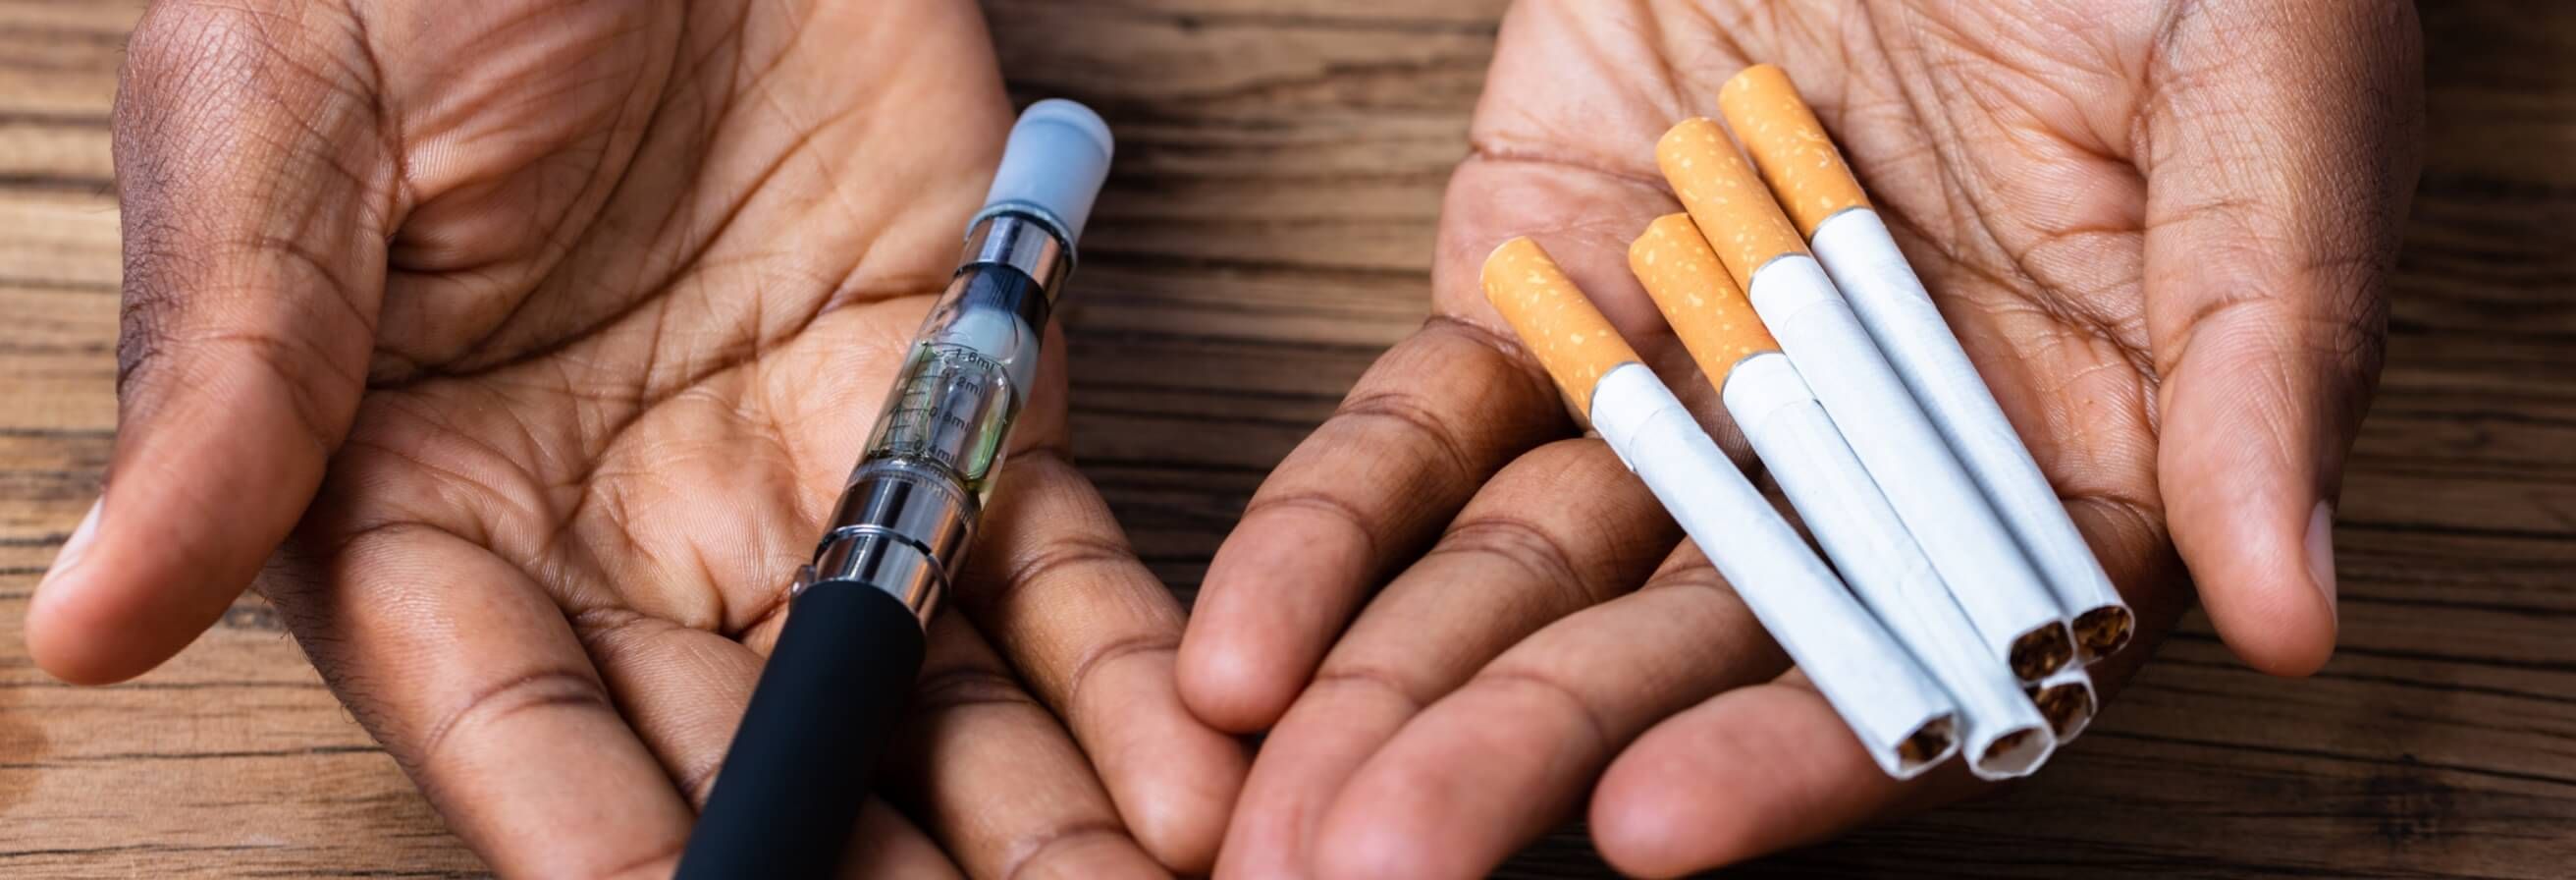 How to Replace Cigarettes, Not the Nicotine